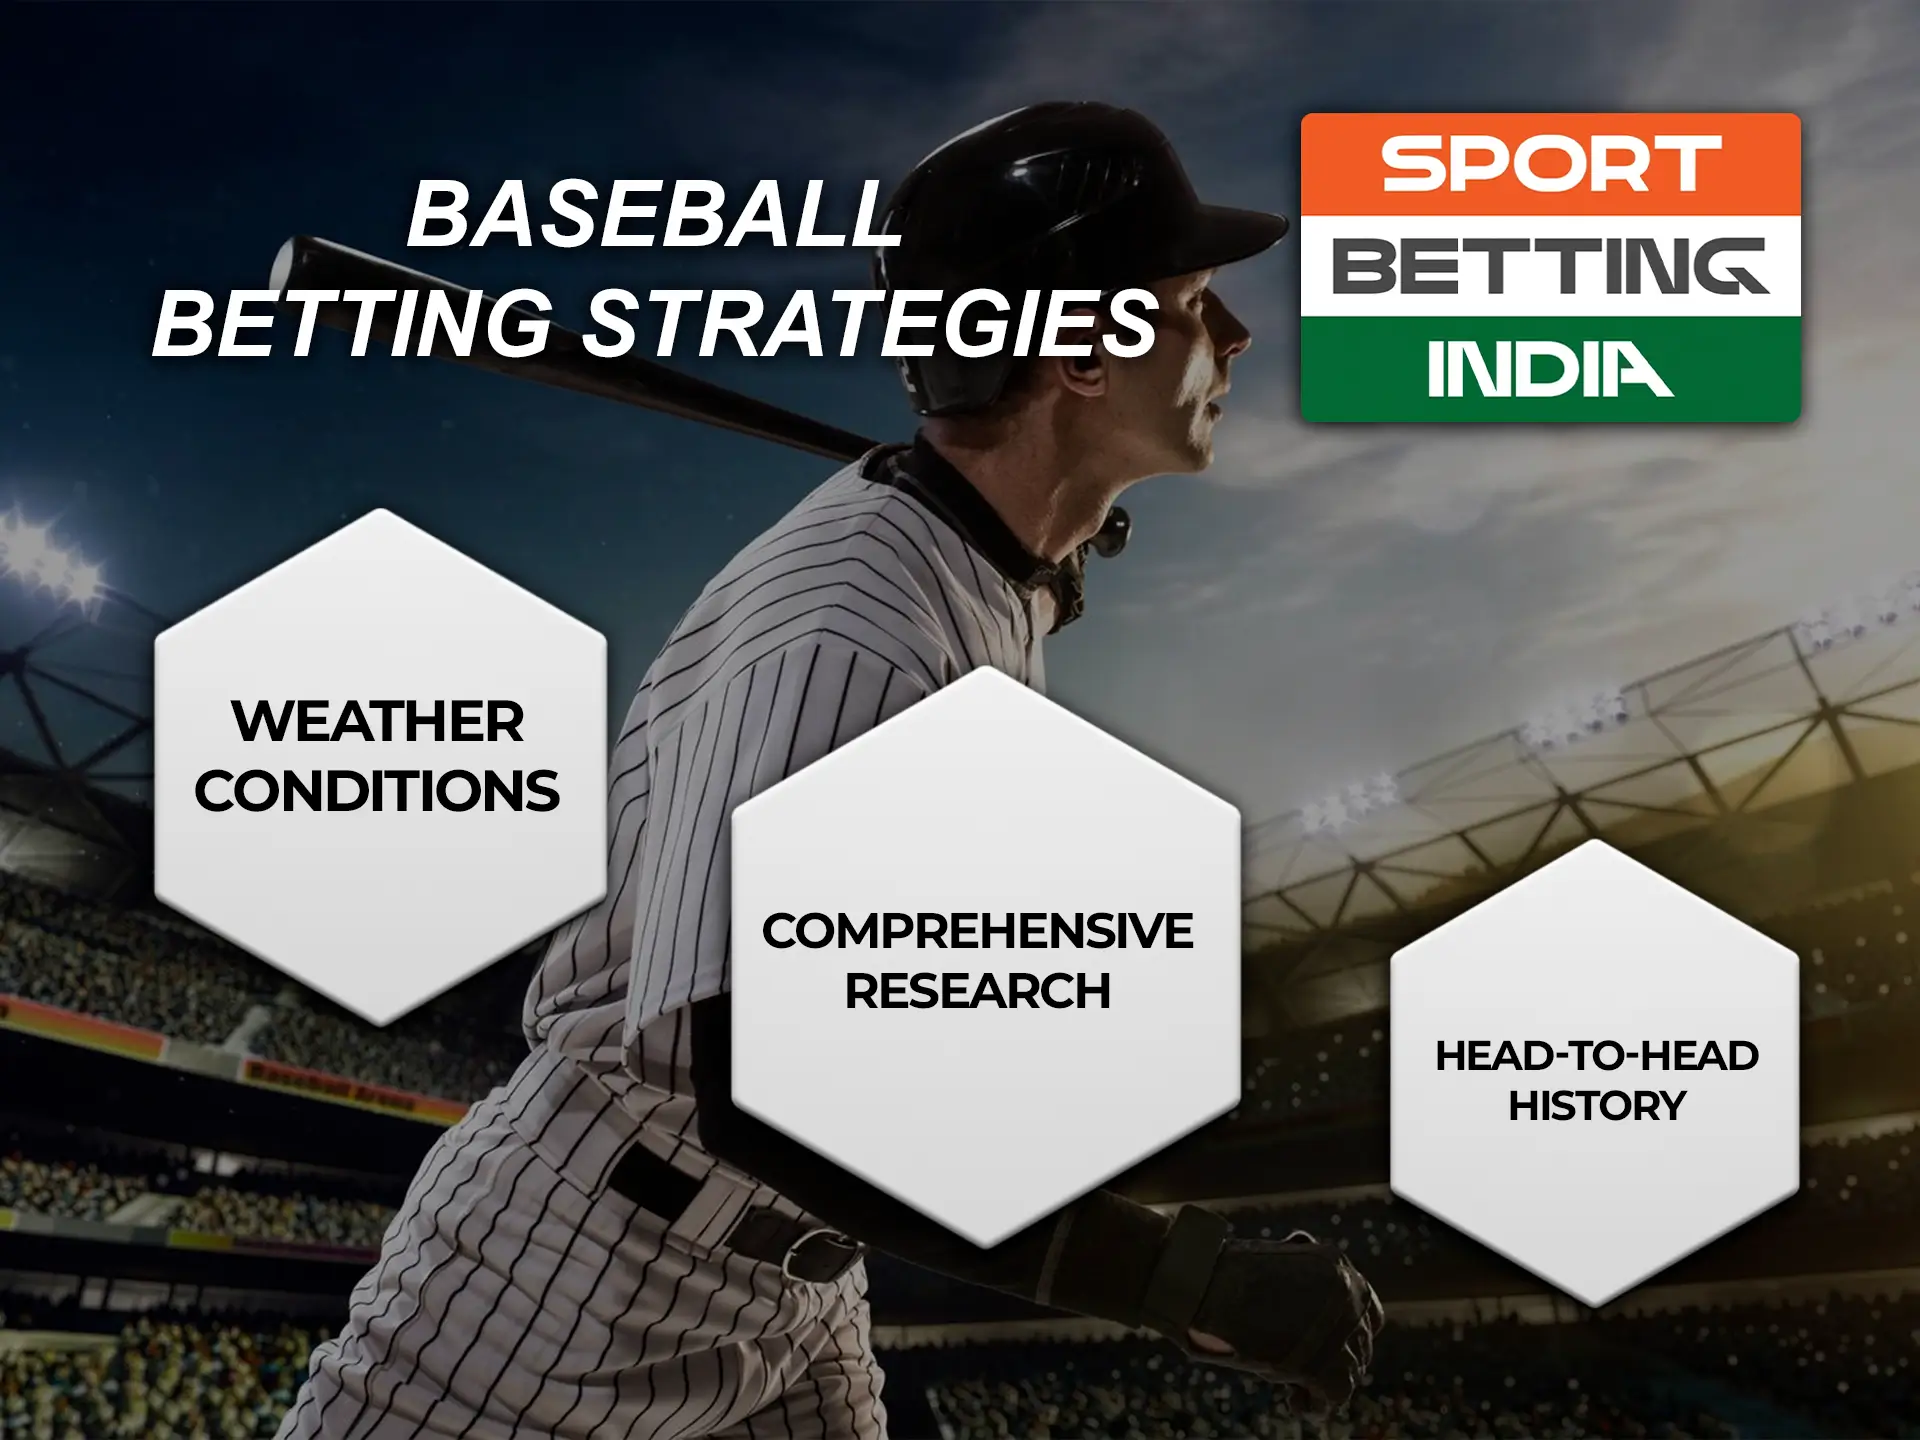 Use the bookmaker's website to see statistics and weather conditions and make a correct prediction on the baseball match.